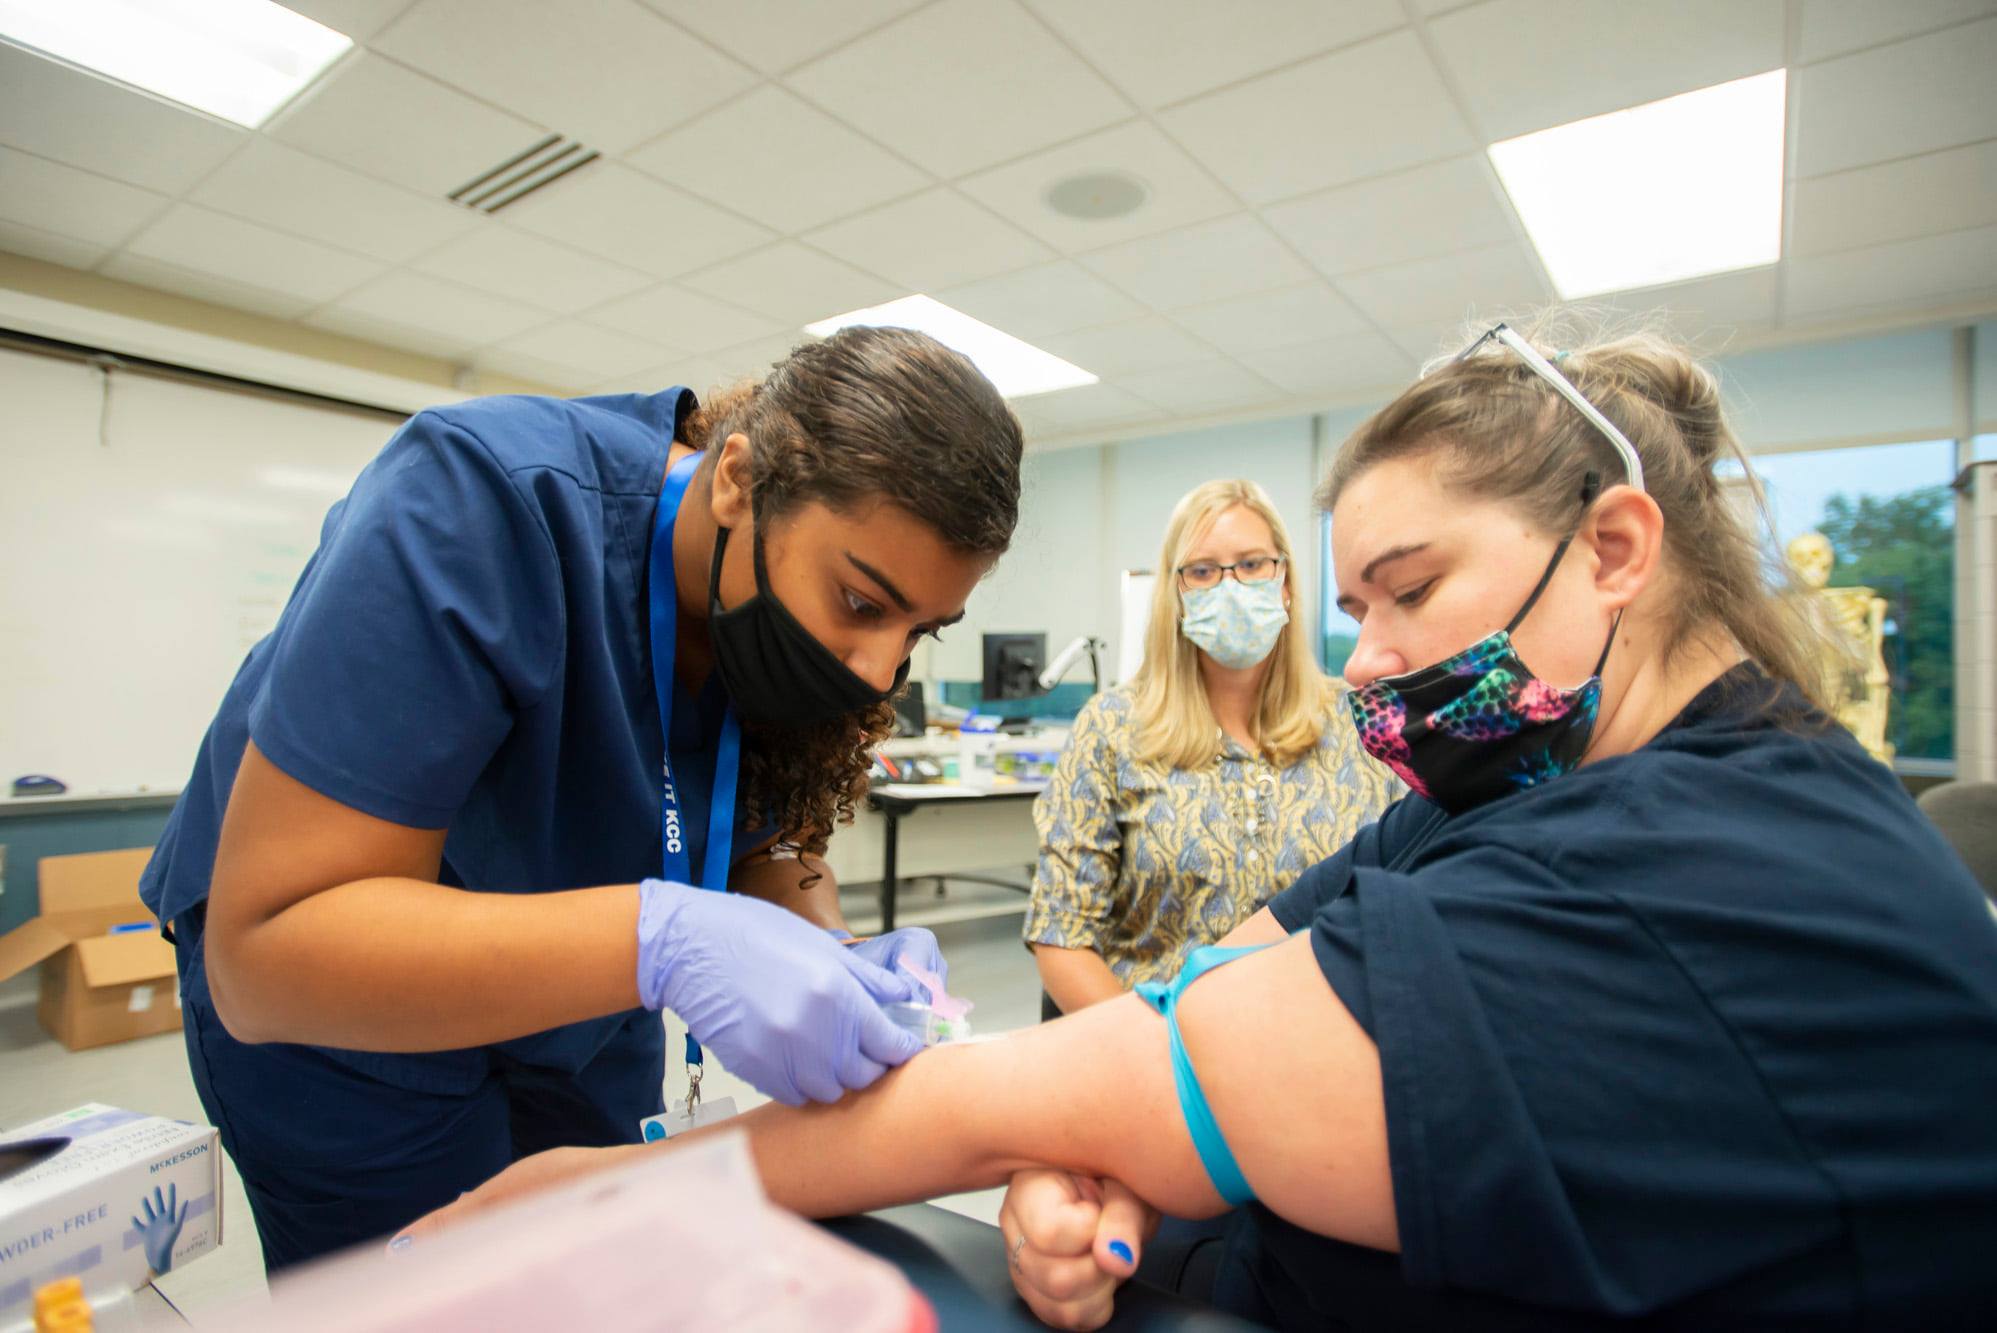 Nursing student administering an IV to a classmate while an instructor looks on